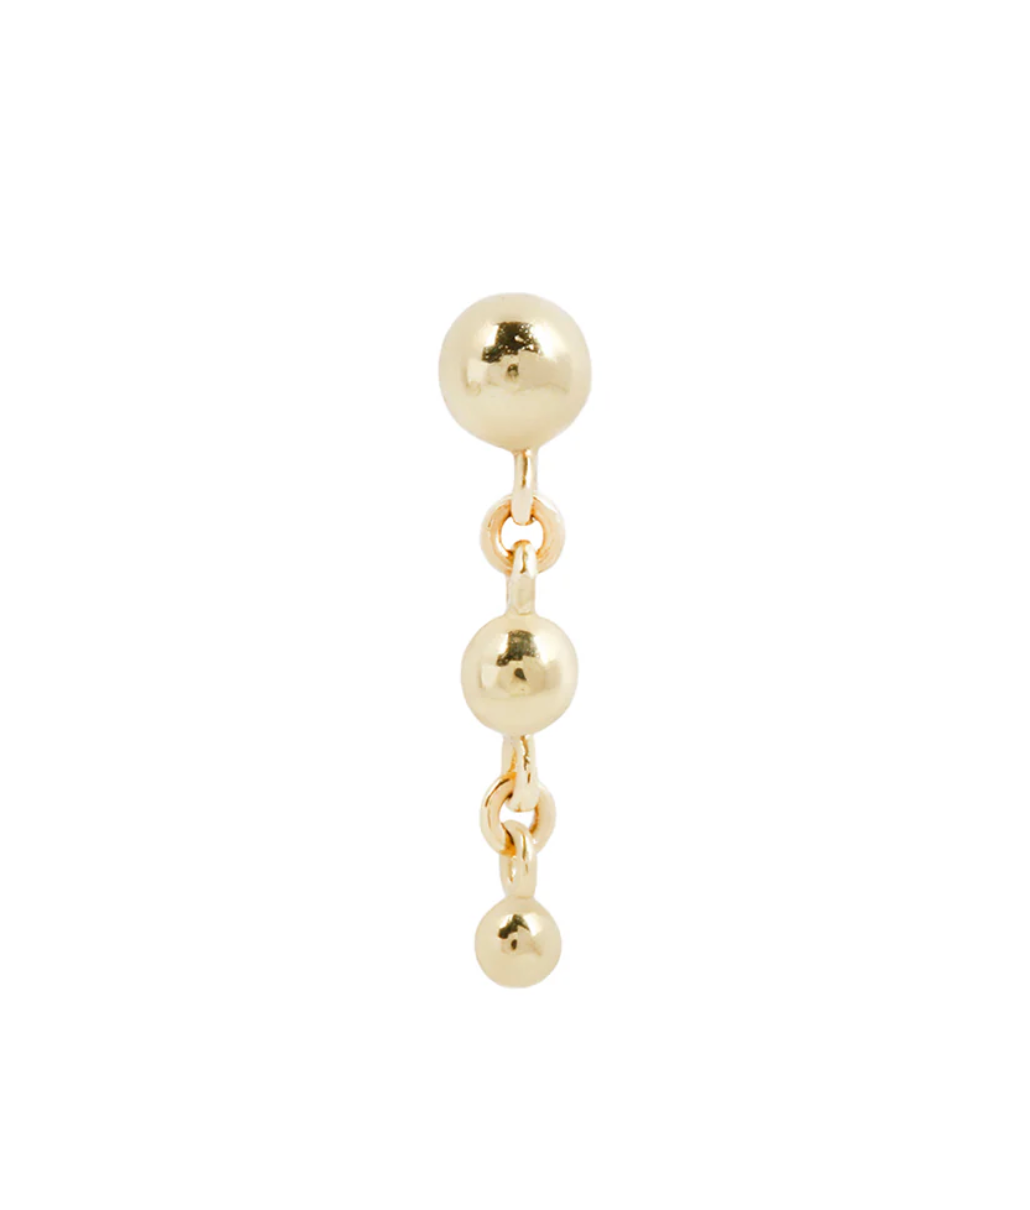 gold dangle stud earring on a white background